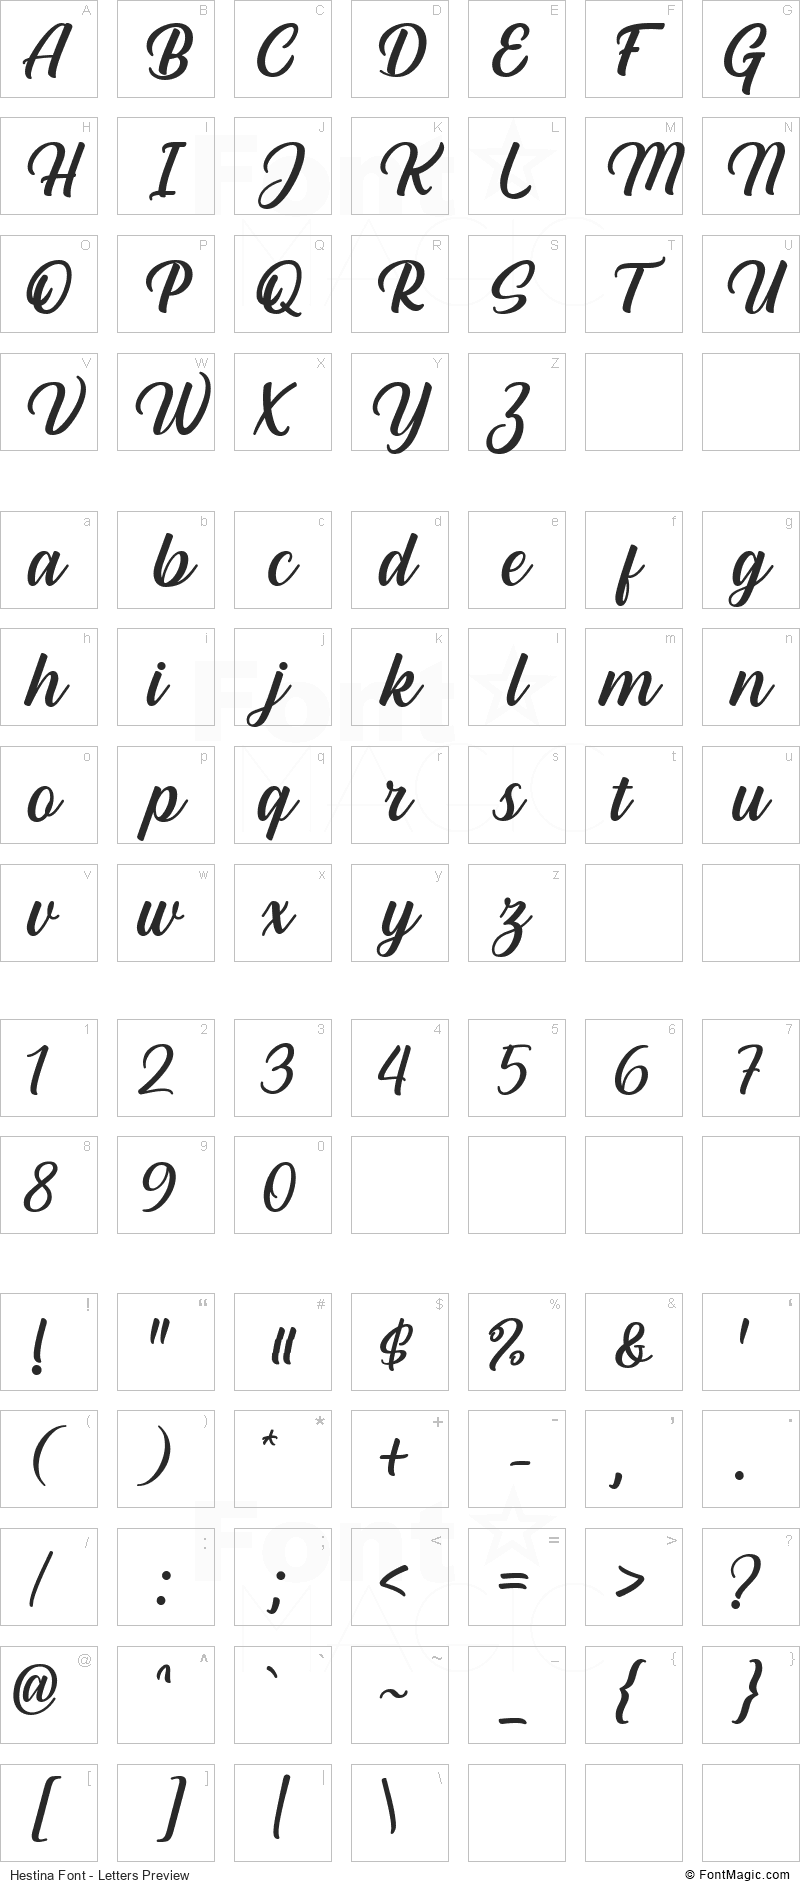 Hestina Font - All Latters Preview Chart